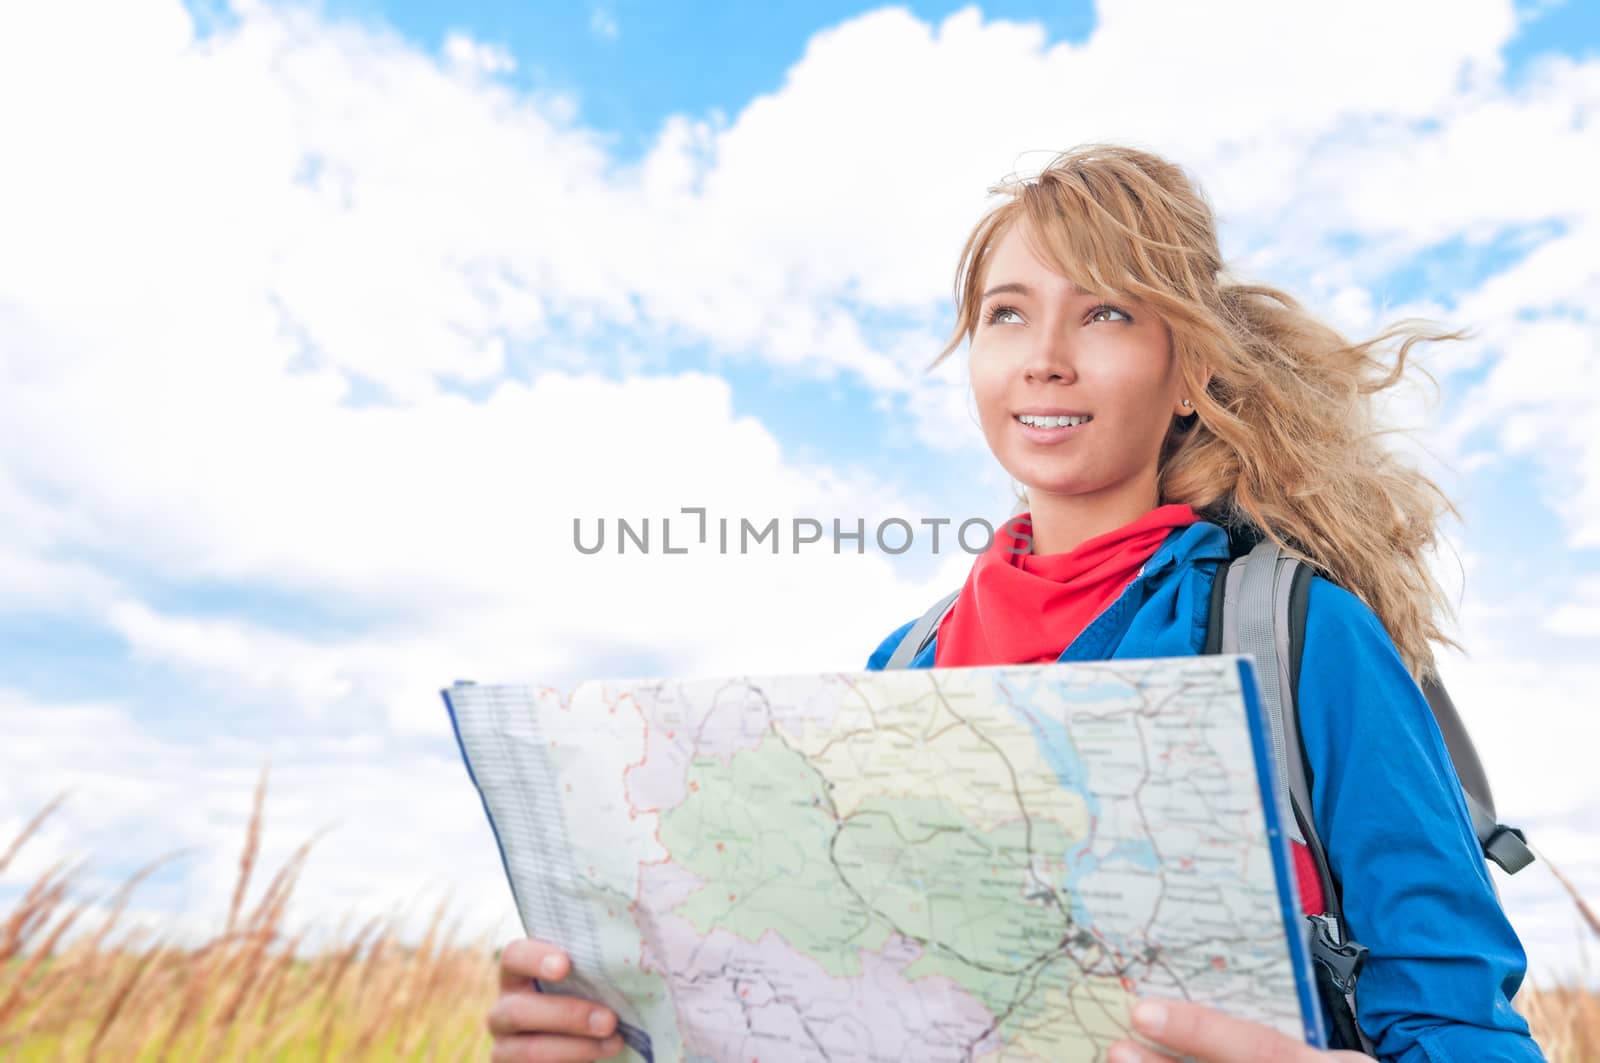 Young pretty woman tourist standing in wheat field with map. Blue cloudy sky in background behind girl. Tourism travel and hiking outdoor in summer. Healthy lifestyle.